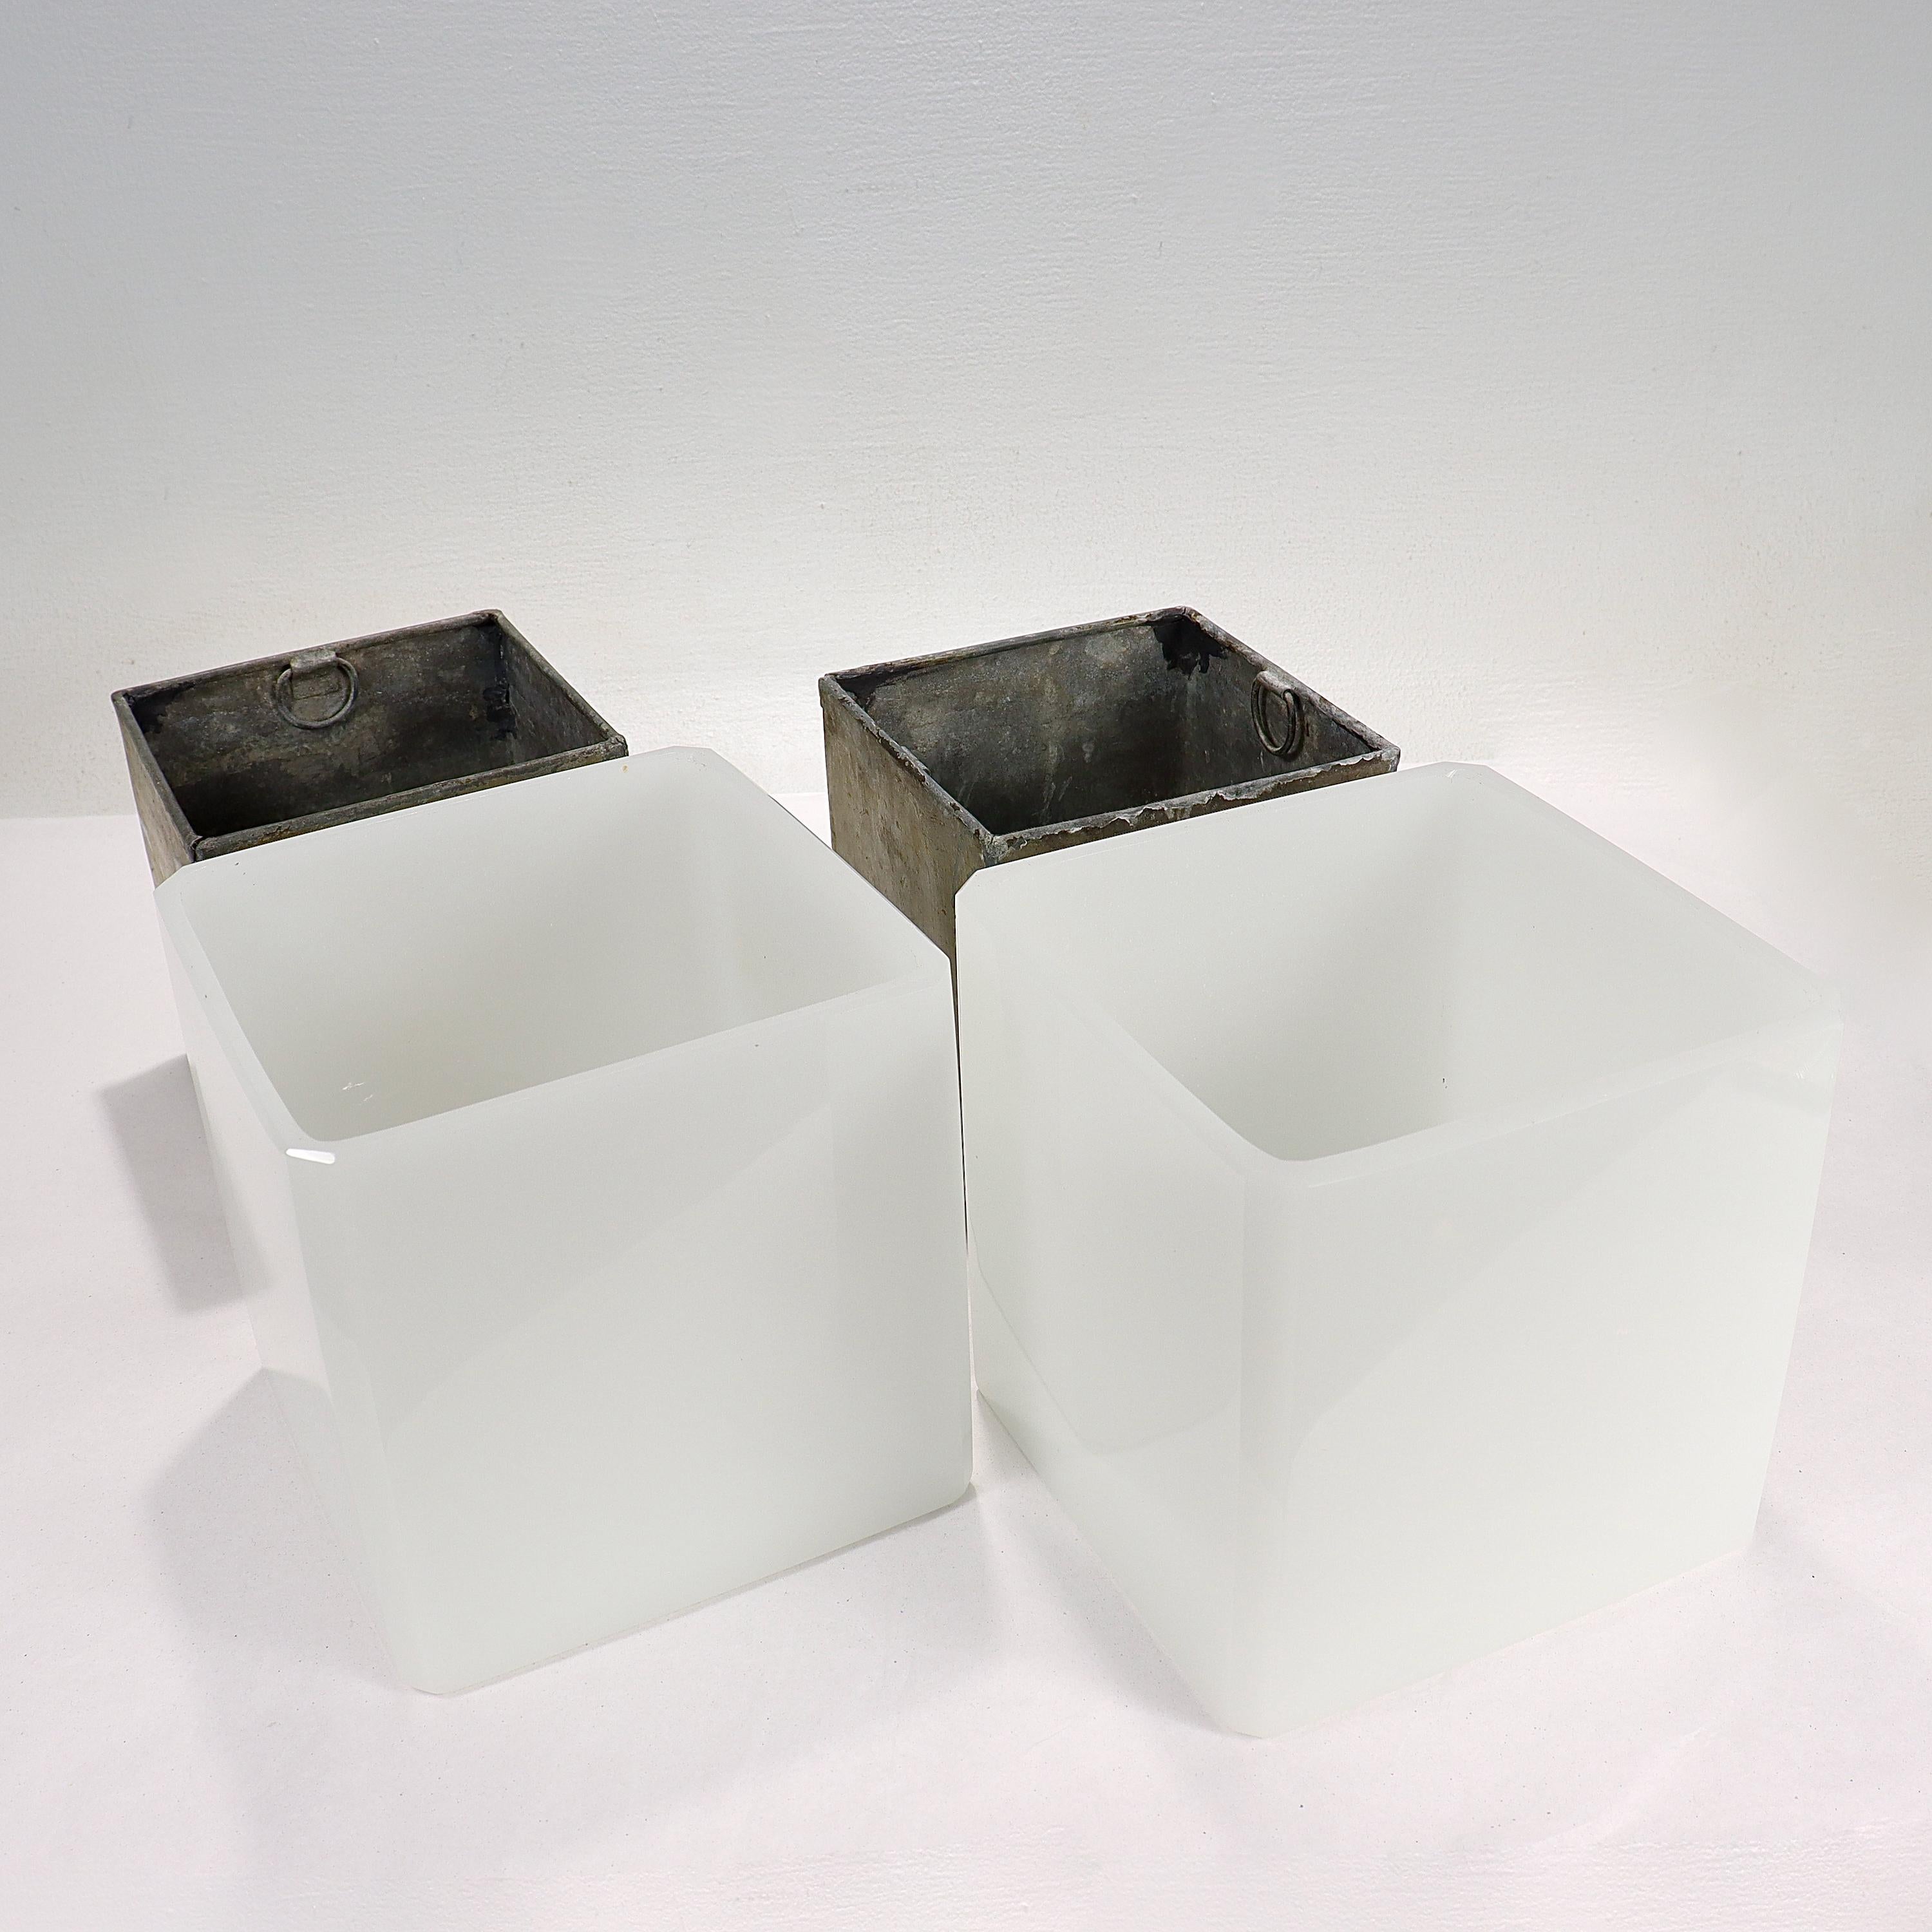 Pair of French Opaline Glass Planters or Jardinieres with Tin Liners In Good Condition For Sale In Philadelphia, PA